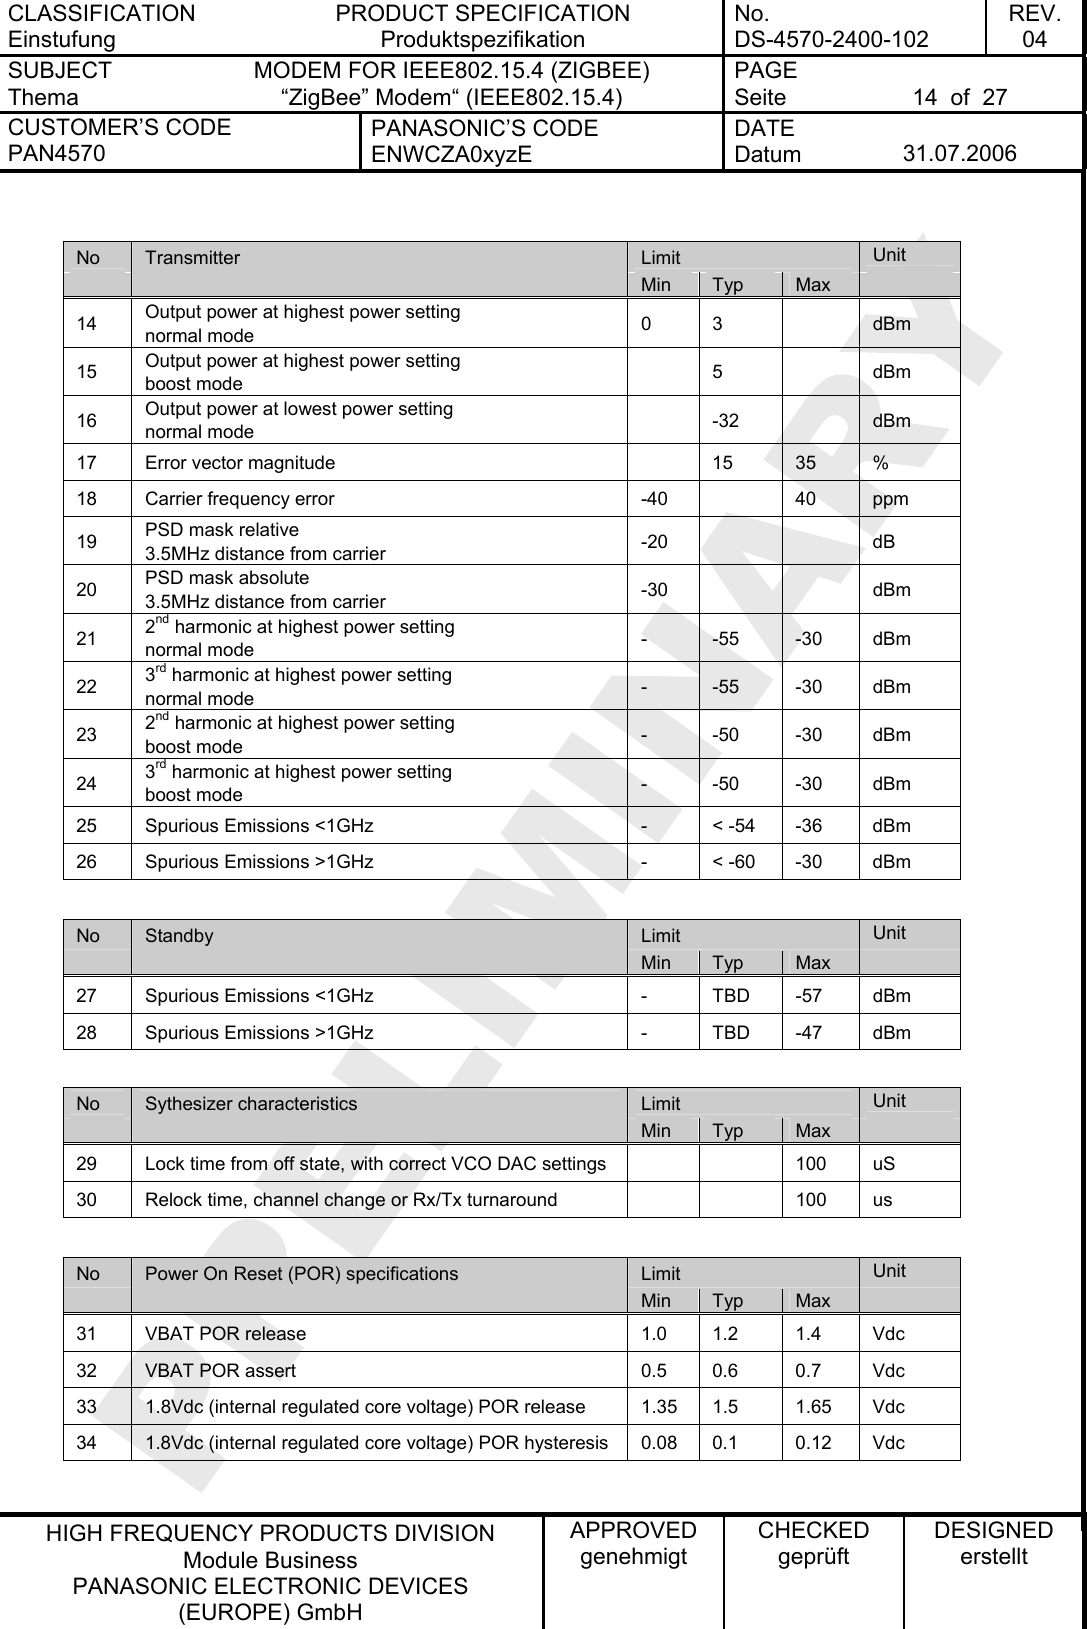 CLASSIFICATION Einstufung PRODUCT SPECIFICATION Produktspezifikation No. DS-4570-2400-102 REV. 04 SUBJECT Thema MODEM FOR IEEE802.15.4 (ZIGBEE) “ZigBee” Modem“ (IEEE802.15.4)   PAGE Seite  14  of  27 CUSTOMER’S CODE PAN4570 PANASONIC’S CODE ENWCZA0xyzE DATE Datum  31.07.2006   HIGH FREQUENCY PRODUCTS DIVISION Module Business PANASONIC ELECTRONIC DEVICES  (EUROPE) GmbH APPROVED genehmigt CHECKED geprüft DESIGNED erstellt   No  Limit  Unit  Transmitter  Min  Typ  Max   14  Output power at highest power setting normal mode  0 3    dBm 15  Output power at highest power setting boost mode   5   dBm 16  Output power at lowest power setting normal mode   -32   dBm 17  Error vector magnitude    15  35  % 18  Carrier frequency error  -40    40  ppm 19  PSD mask relative 3.5MHz distance from carrier  -20     dB 20  PSD mask absolute 3.5MHz distance from carrier  -30     dBm 21  2nd harmonic at highest power setting normal mode  - -55 -30 dBm 22  3rd harmonic at highest power setting normal mode  - -55 -30 dBm 23  2nd harmonic at highest power setting boost mode  - -50 -30 dBm 24  3rd harmonic at highest power setting boost mode  - -50 -30 dBm 25  Spurious Emissions &lt;1GHz  -  &lt; -54  -36  dBm 26  Spurious Emissions &gt;1GHz  -  &lt; -60  -30  dBm  No  Limit  Unit  Standby  Min  Typ  Max   27  Spurious Emissions &lt;1GHz  -  TBD  -57  dBm 28  Spurious Emissions &gt;1GHz  -  TBD  -47  dBm  No  Limit  Unit  Sythesizer characteristics  Min  Typ  Max   29  Lock time from off state, with correct VCO DAC settings      100  uS 30  Relock time, channel change or Rx/Tx turnaround      100  us  No  Limit  Unit  Power On Reset (POR) specifications  Min  Typ  Max   31  VBAT POR release  1.0  1.2  1.4  Vdc 32  VBAT POR assert  0.5  0.6  0.7  Vdc 33  1.8Vdc (internal regulated core voltage) POR release 1.35 1.5 1.65 Vdc 34  1.8Vdc (internal regulated core voltage) POR hysteresis  0.08  0.1  0.12  Vdc  